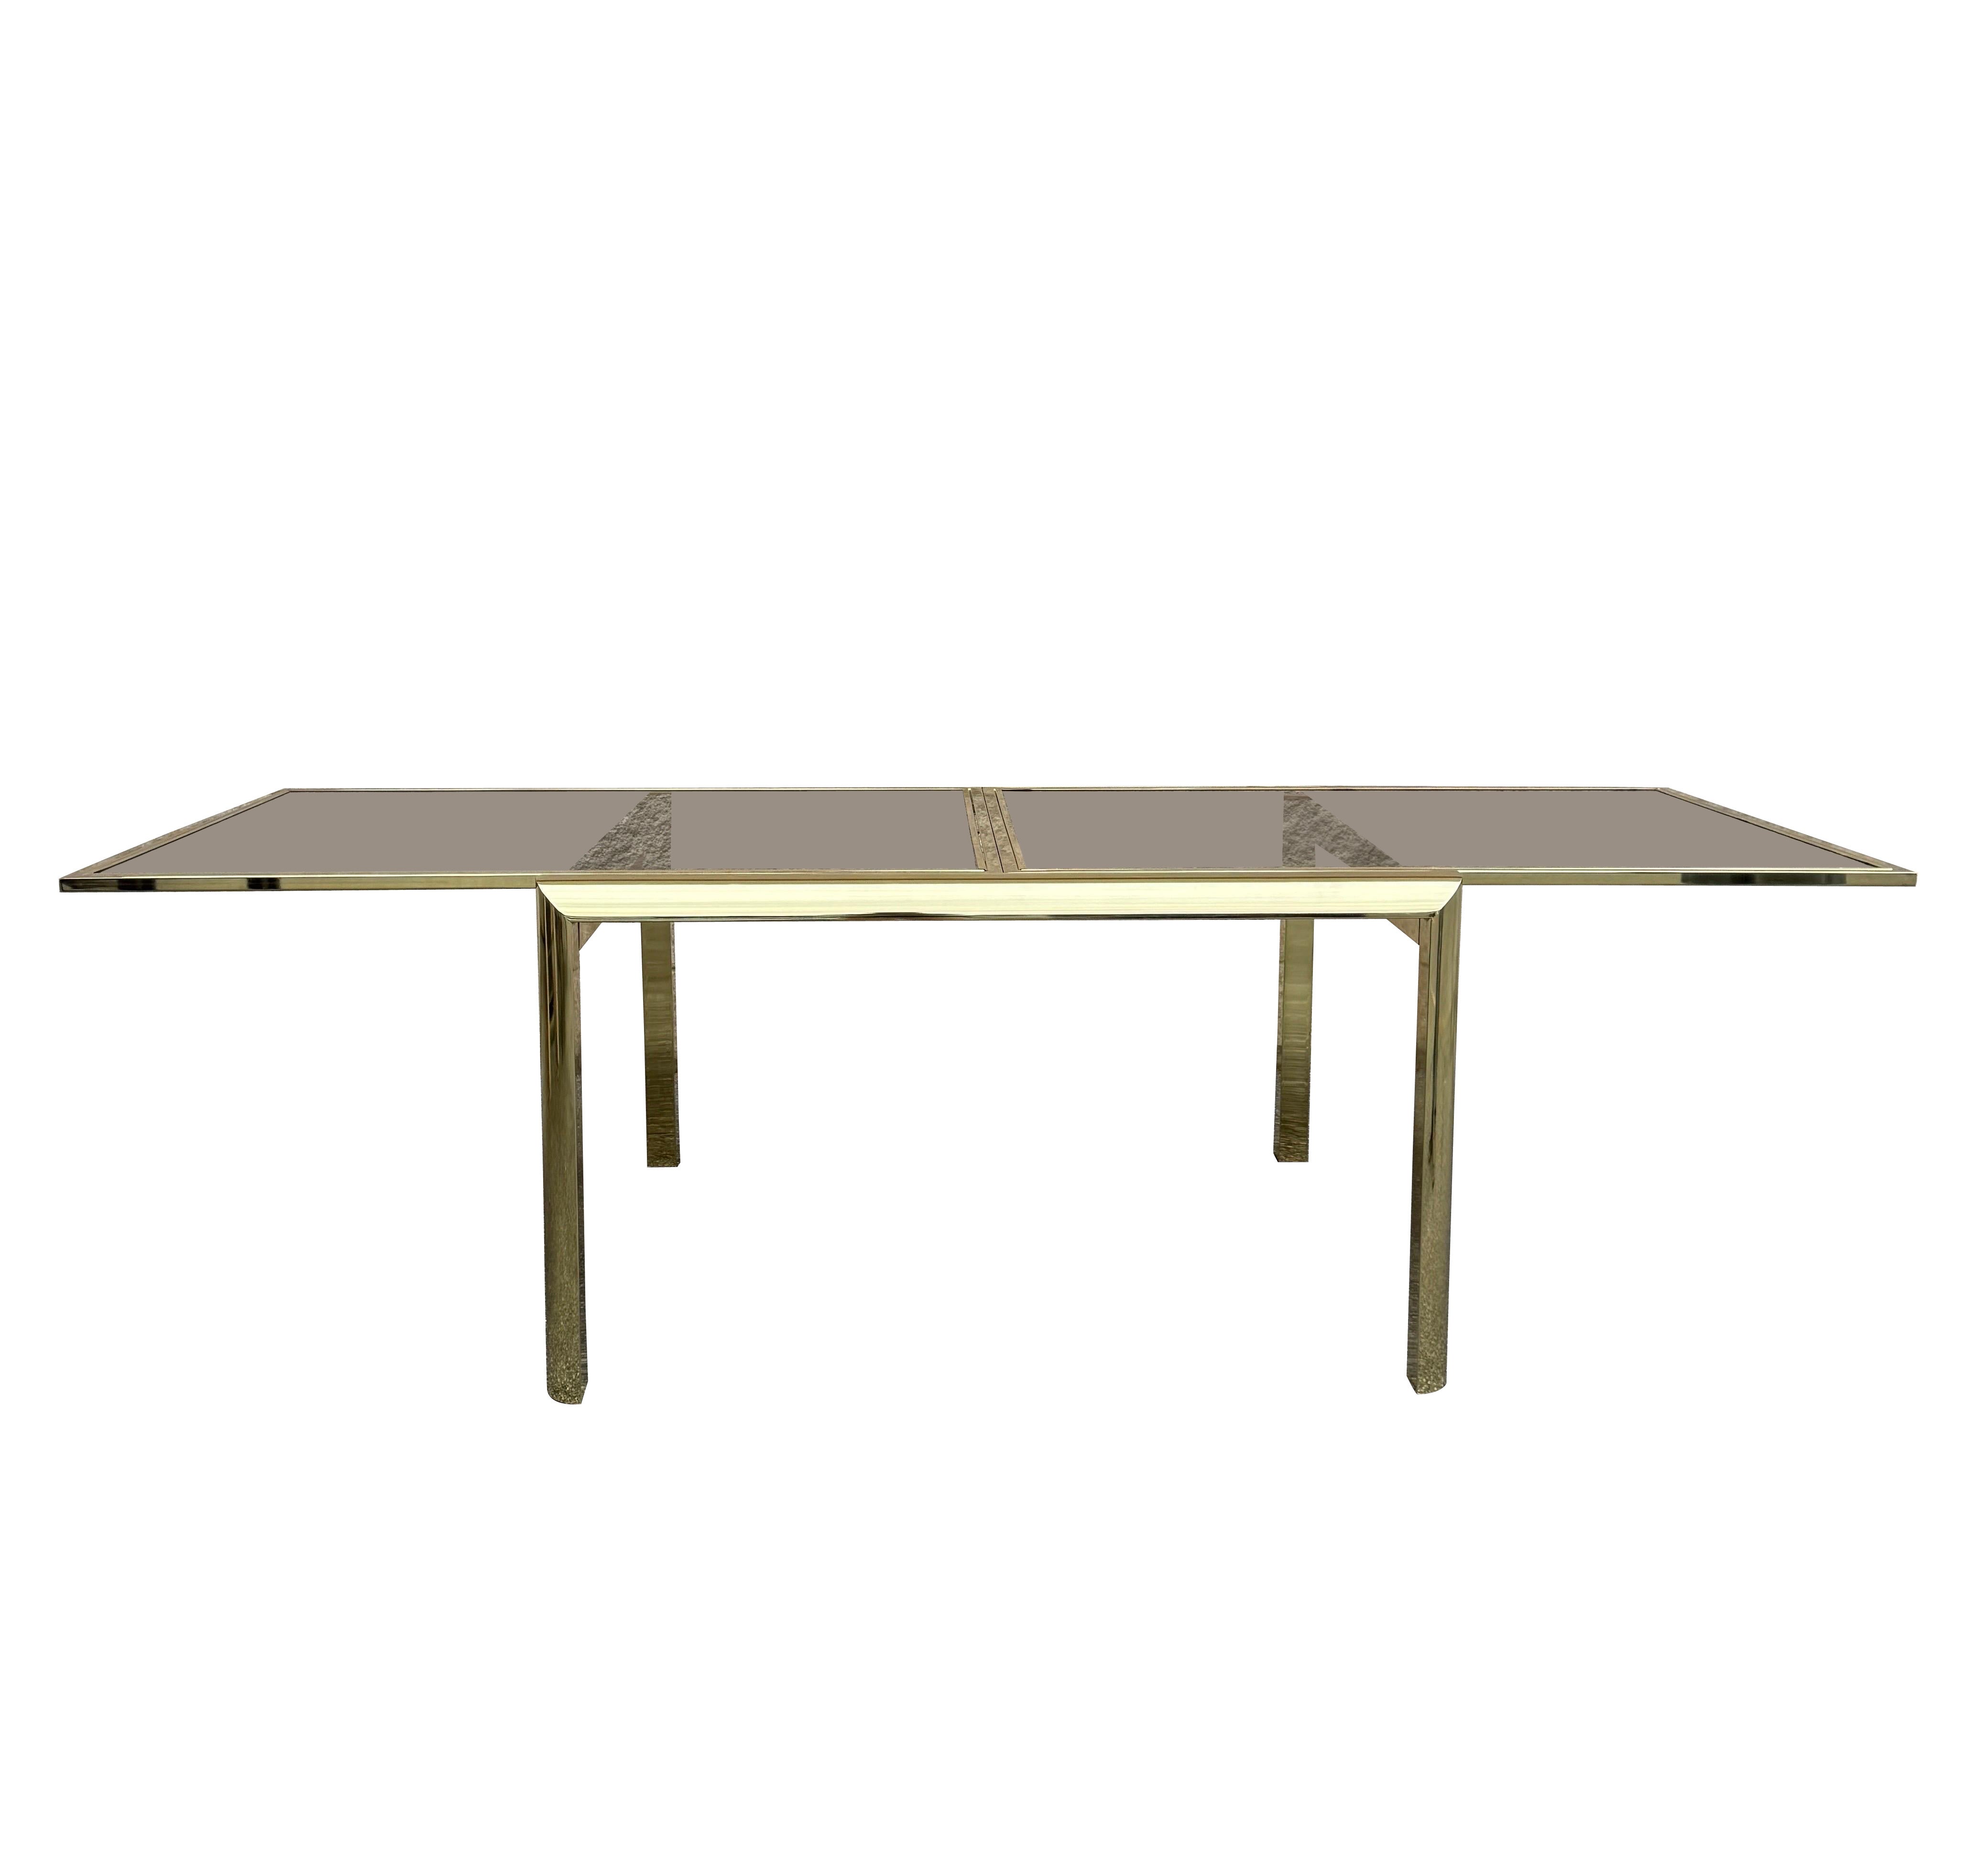 Vintage DIA Hollywood Regency Style Brass and Glass Top Extendable Dining Table For Sale